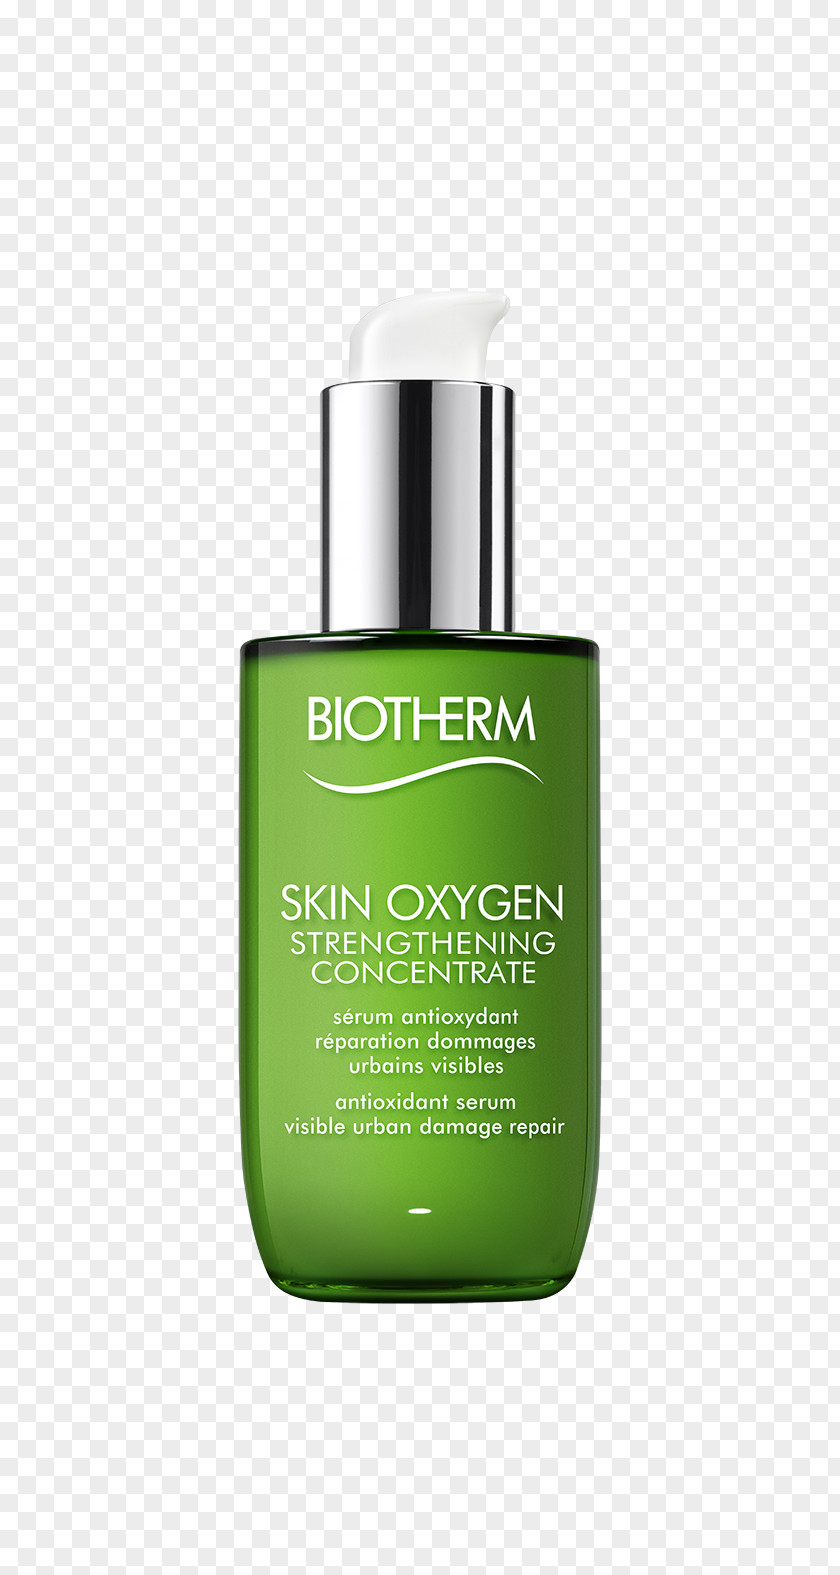 Biotherm Lotion Skin Serum Oxygen PNG